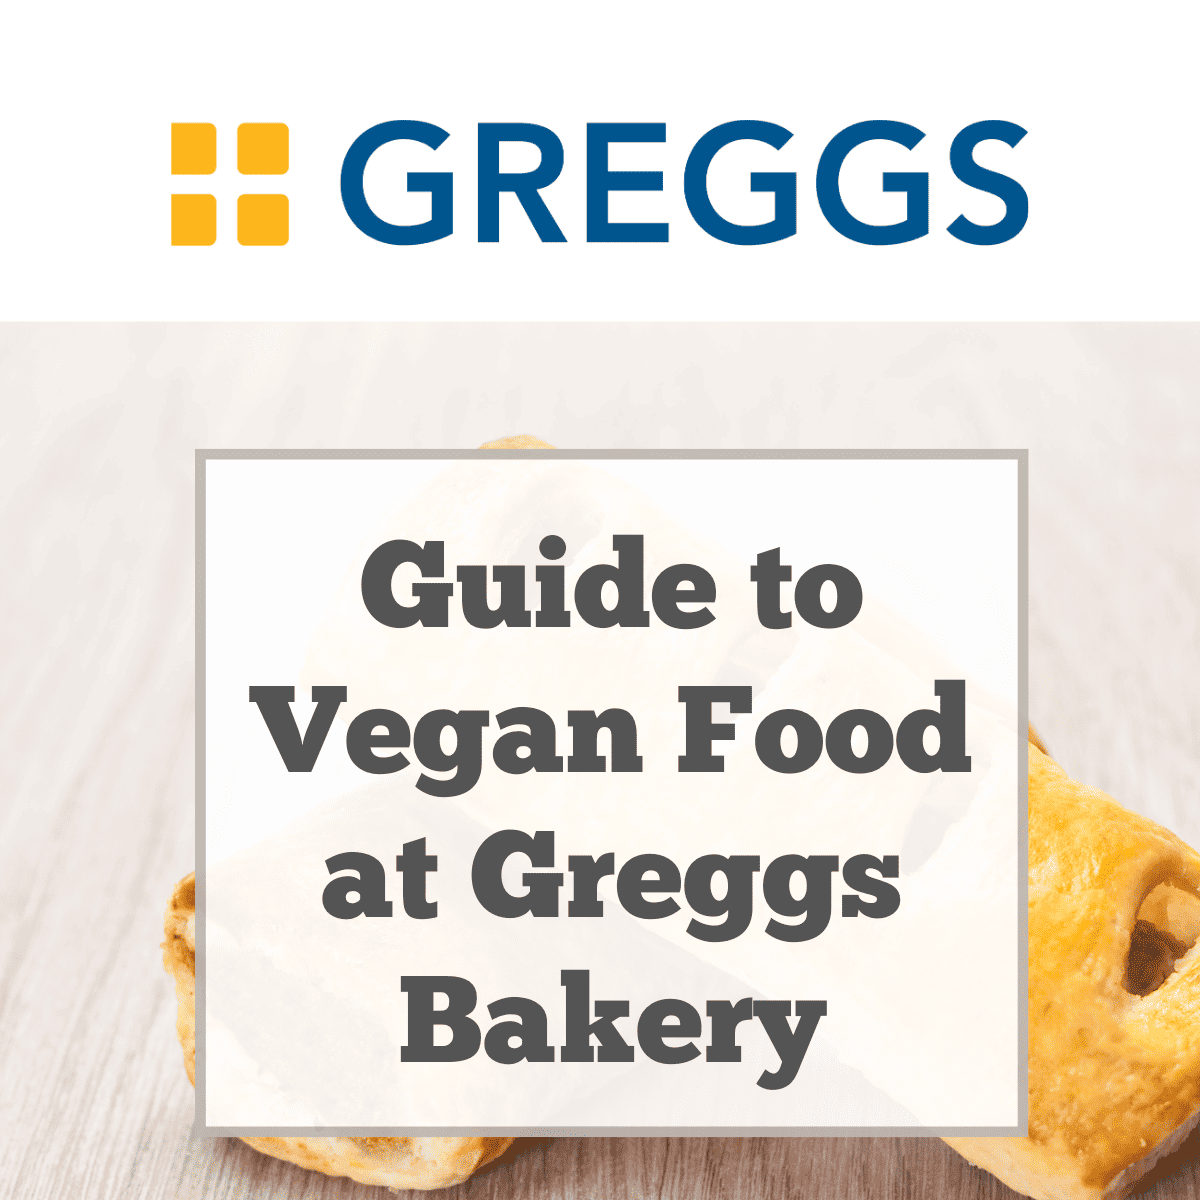 Vegan Guide to Food at Greggs Bakery – Oct 23